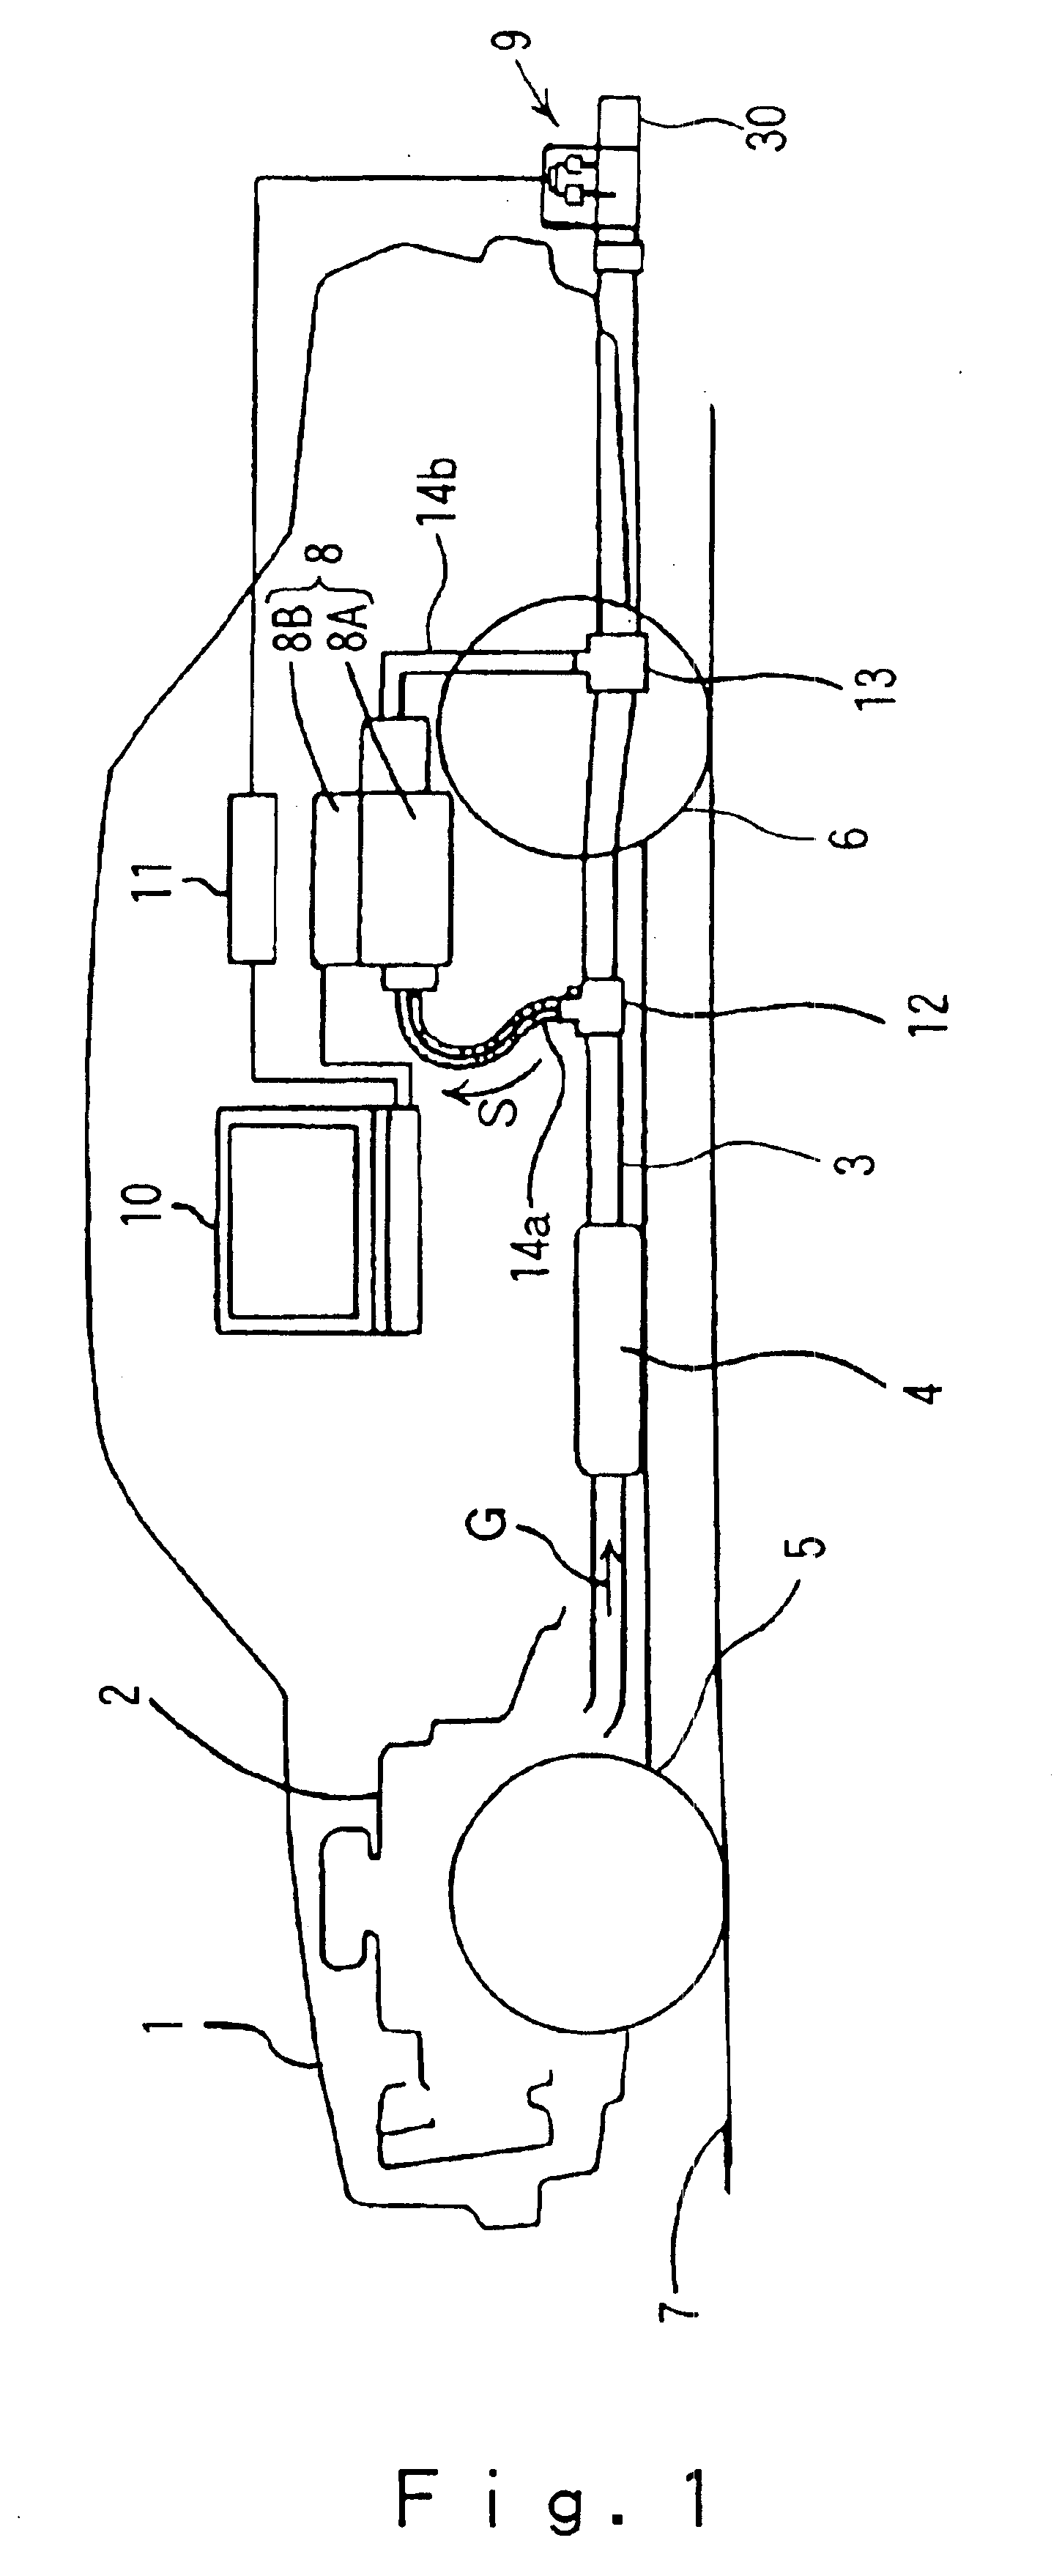 Vehicle-installed exhaust gas analyzing apparatus